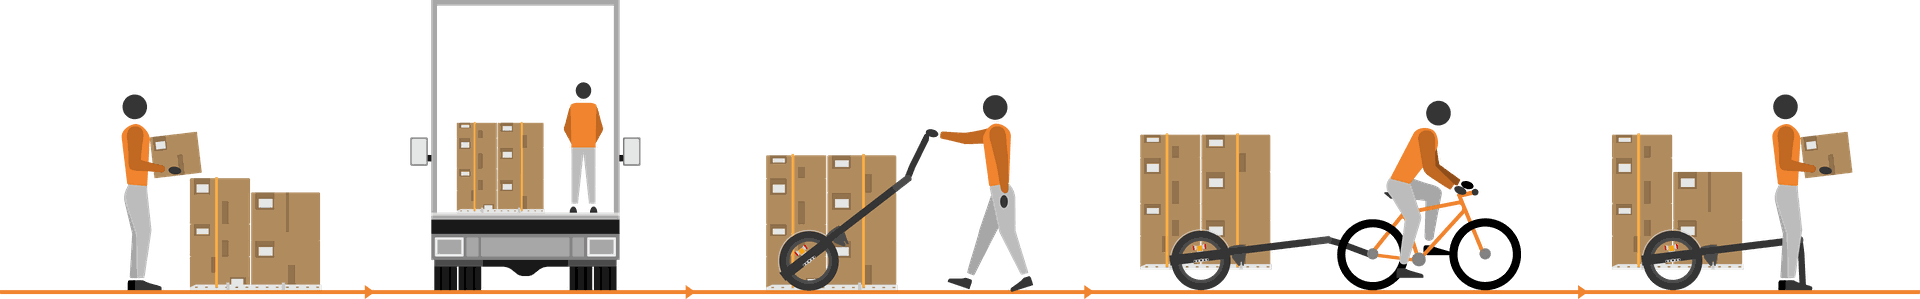 Illustration showing the supply chain of a flatbed using a bike trailer